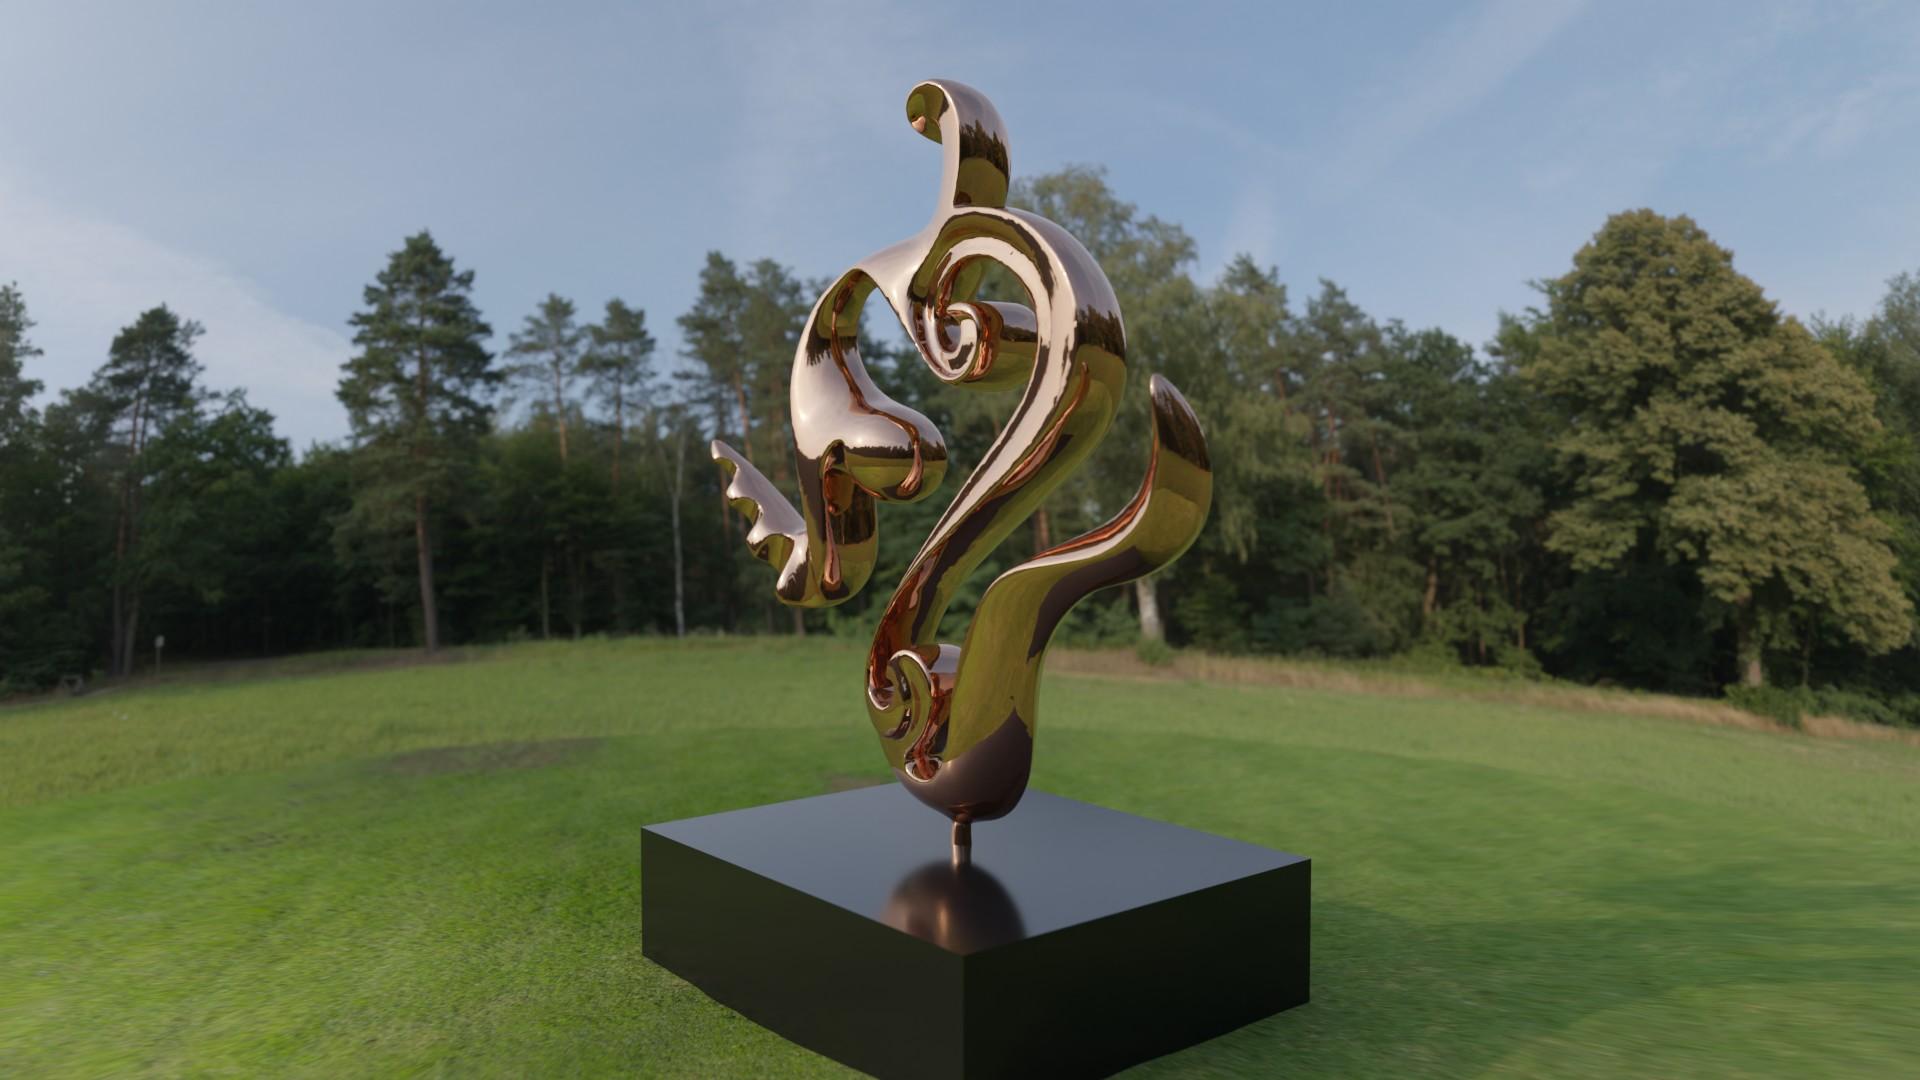 The Flow, monumental size - Abstract Sculpture by Jan Willem Krijger